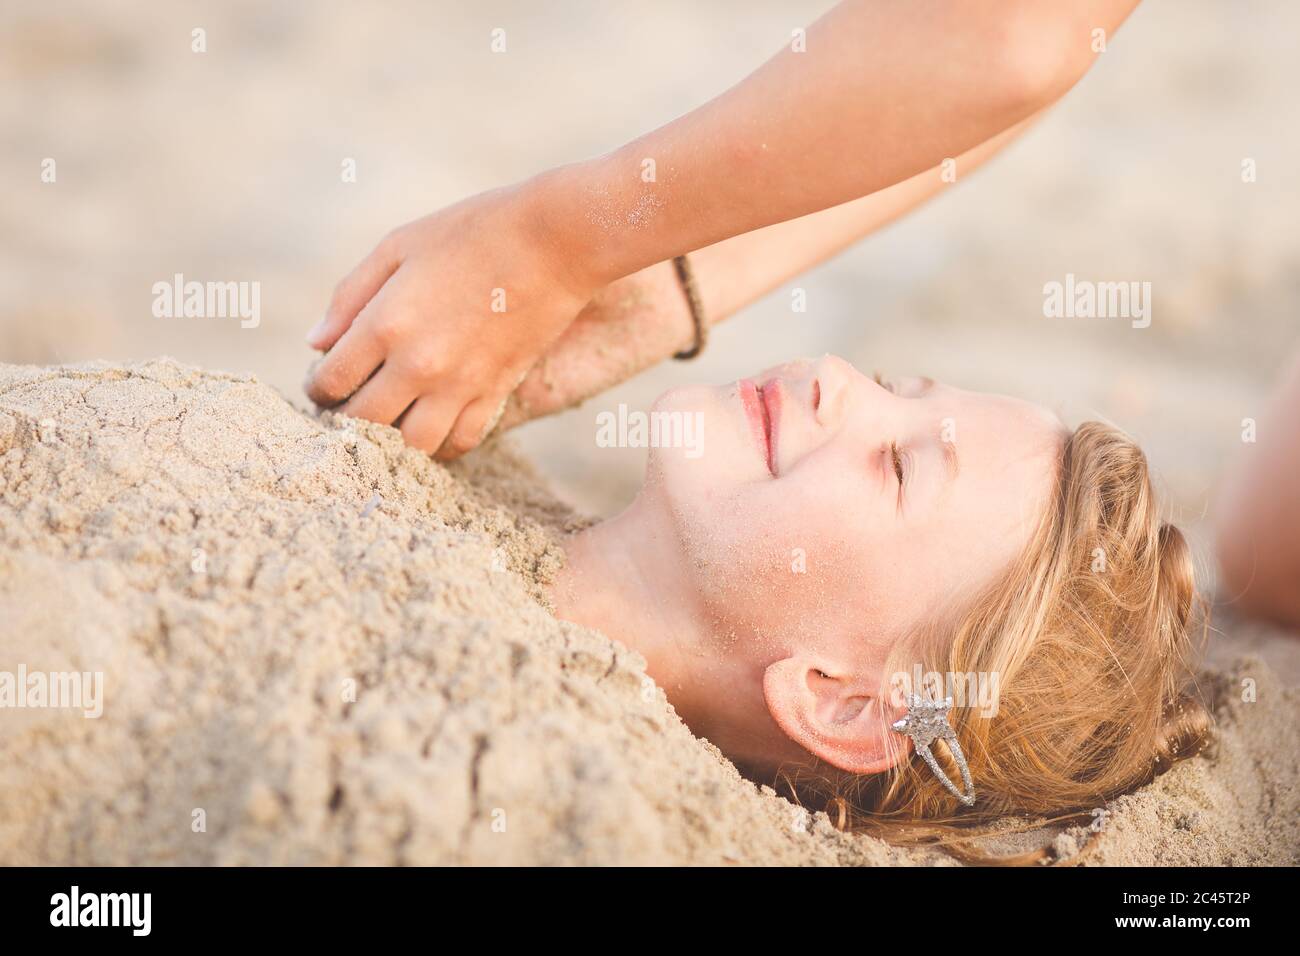 Two hands digging young girl in the sand at the beach Stock Photo